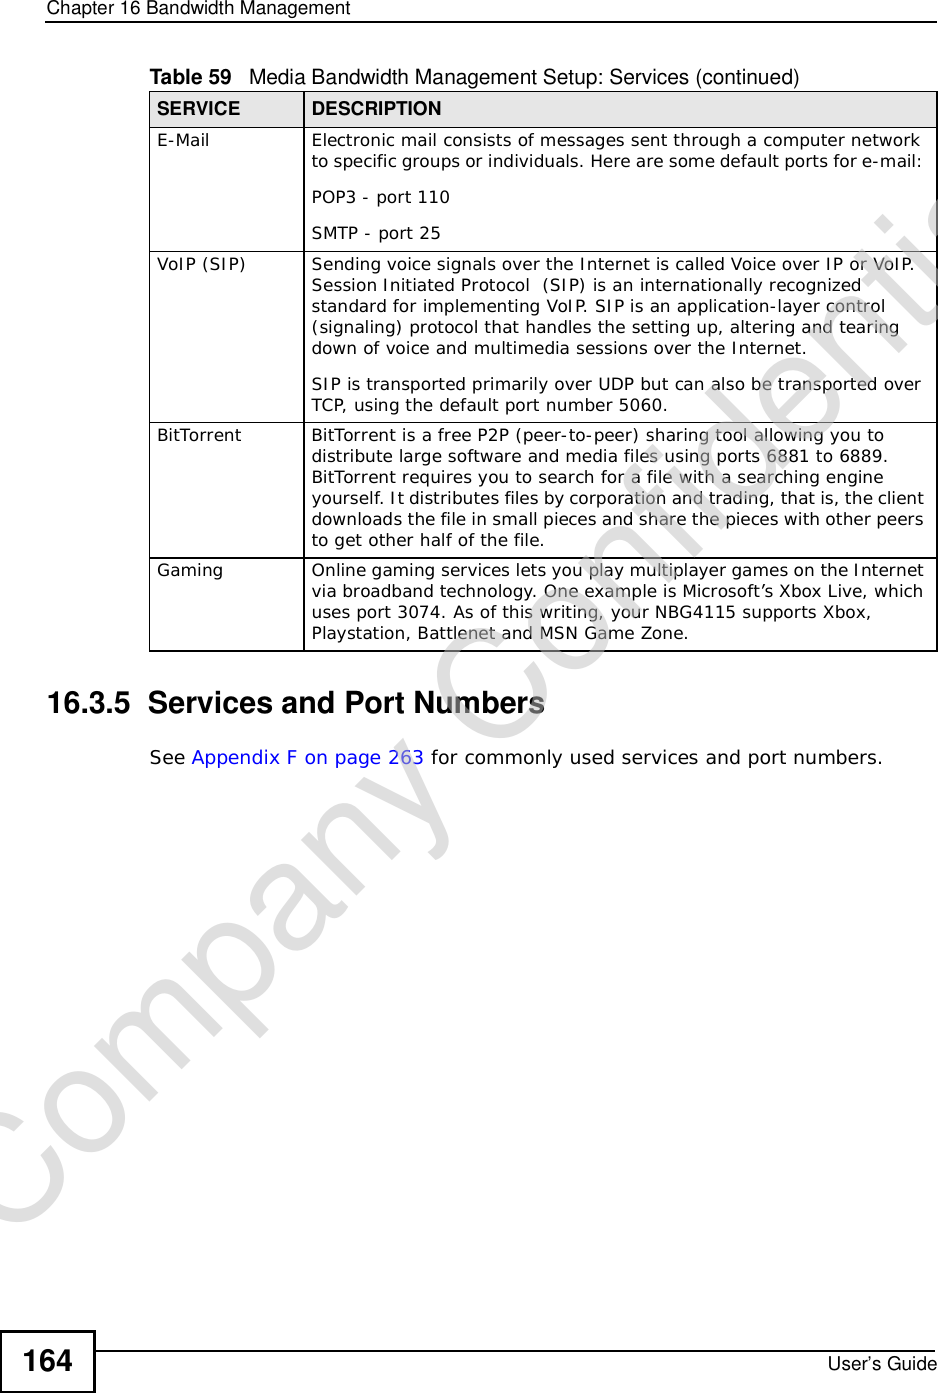 Chapter 16Bandwidth ManagementUser’s Guide16416.3.5  Services and Port NumbersSee Appendix F on page 263 for commonly used services and port numbers.E-MailElectronic mail consists of messages sent through a computer network to specific groups or individuals. Here are some default ports for e-mail: POP3 - port 110SMTP - port 25VoIP (SIP)Sending voice signals over the Internet is called Voice over IP or VoIP. Session Initiated Protocol  (SIP) is an internationally recognized standard for implementing VoIP. SIP is an application-layer control (signaling) protocol that handles the setting up, altering and tearing down of voice and multimedia sessions over the Internet.SIP is transported primarily over UDP but can also be transported over TCP, using the default port number 5060. BitTorrentBitTorrent is a free P2P (peer-to-peer) sharing tool allowing you to distribute large software and media files using ports 6881 to 6889. BitTorrent requires you to search for a file with a searching engine yourself. It distributes files by corporation and trading, that is, the client downloads the file in small pieces and share the pieces with other peers to get other half of the file.GamingOnline gaming services lets you play multiplayer games on the Internet via broadband technology. One example is Microsoft’s Xbox Live, which uses port 3074. As of this writing, your NBG4115 supports Xbox, Playstation, Battlenet and MSN Game Zone.Table 59   Media Bandwidth Management Setup: Services (continued)SERVICE DESCRIPTIONCompany Confidential